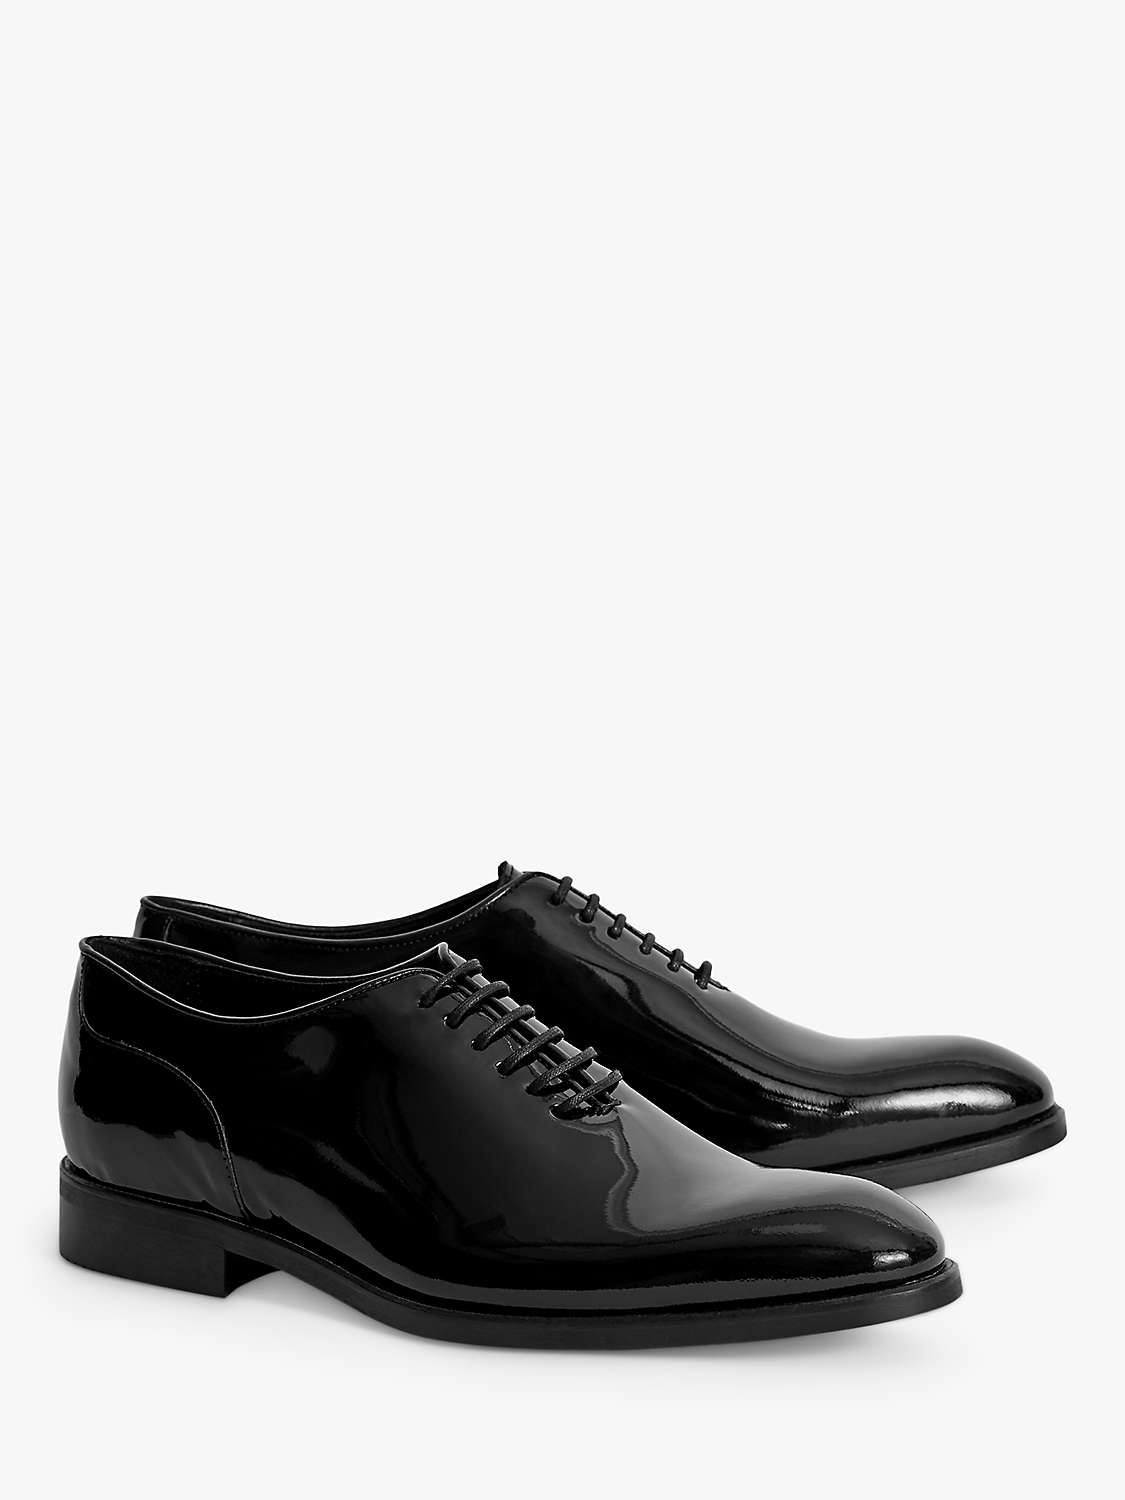 Buy Reiss Bay Patent Leather Whole Cut Shoes, Black Online at johnlewis.com